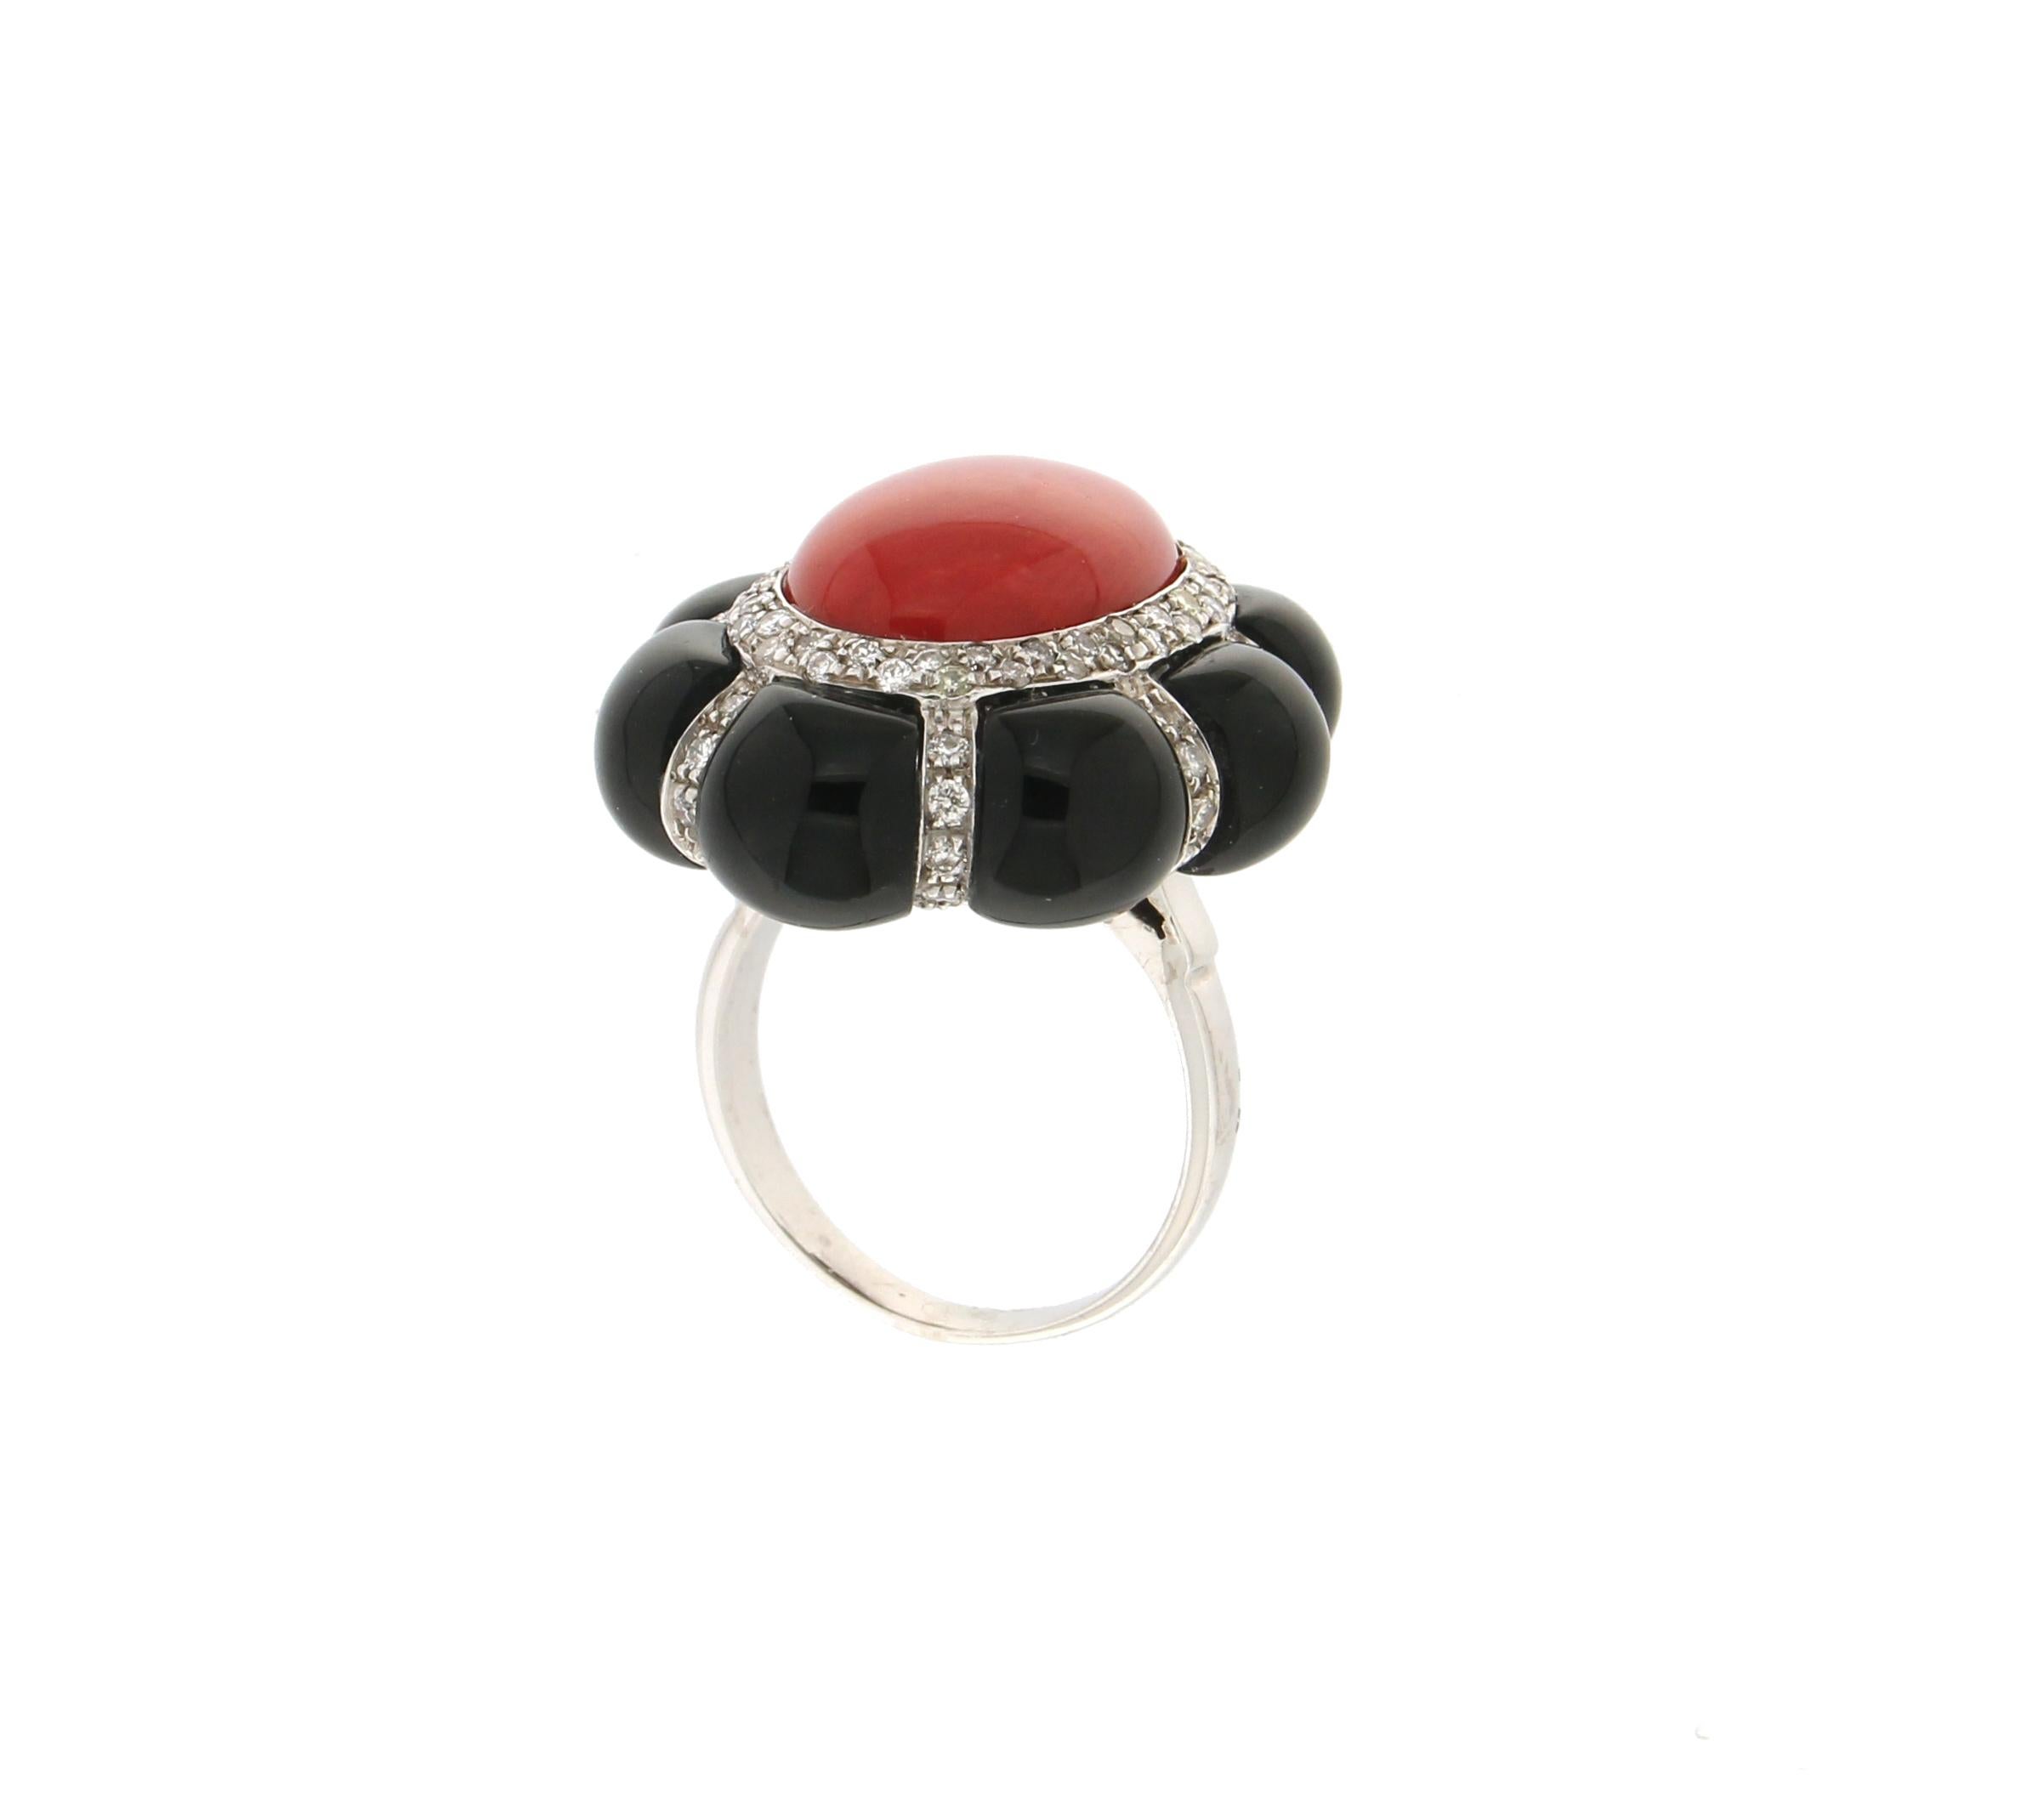 Brilliant Cut Handcraft Coral 18 Karat White Gold Onyx Diamonds Cocktail Ring For Sale